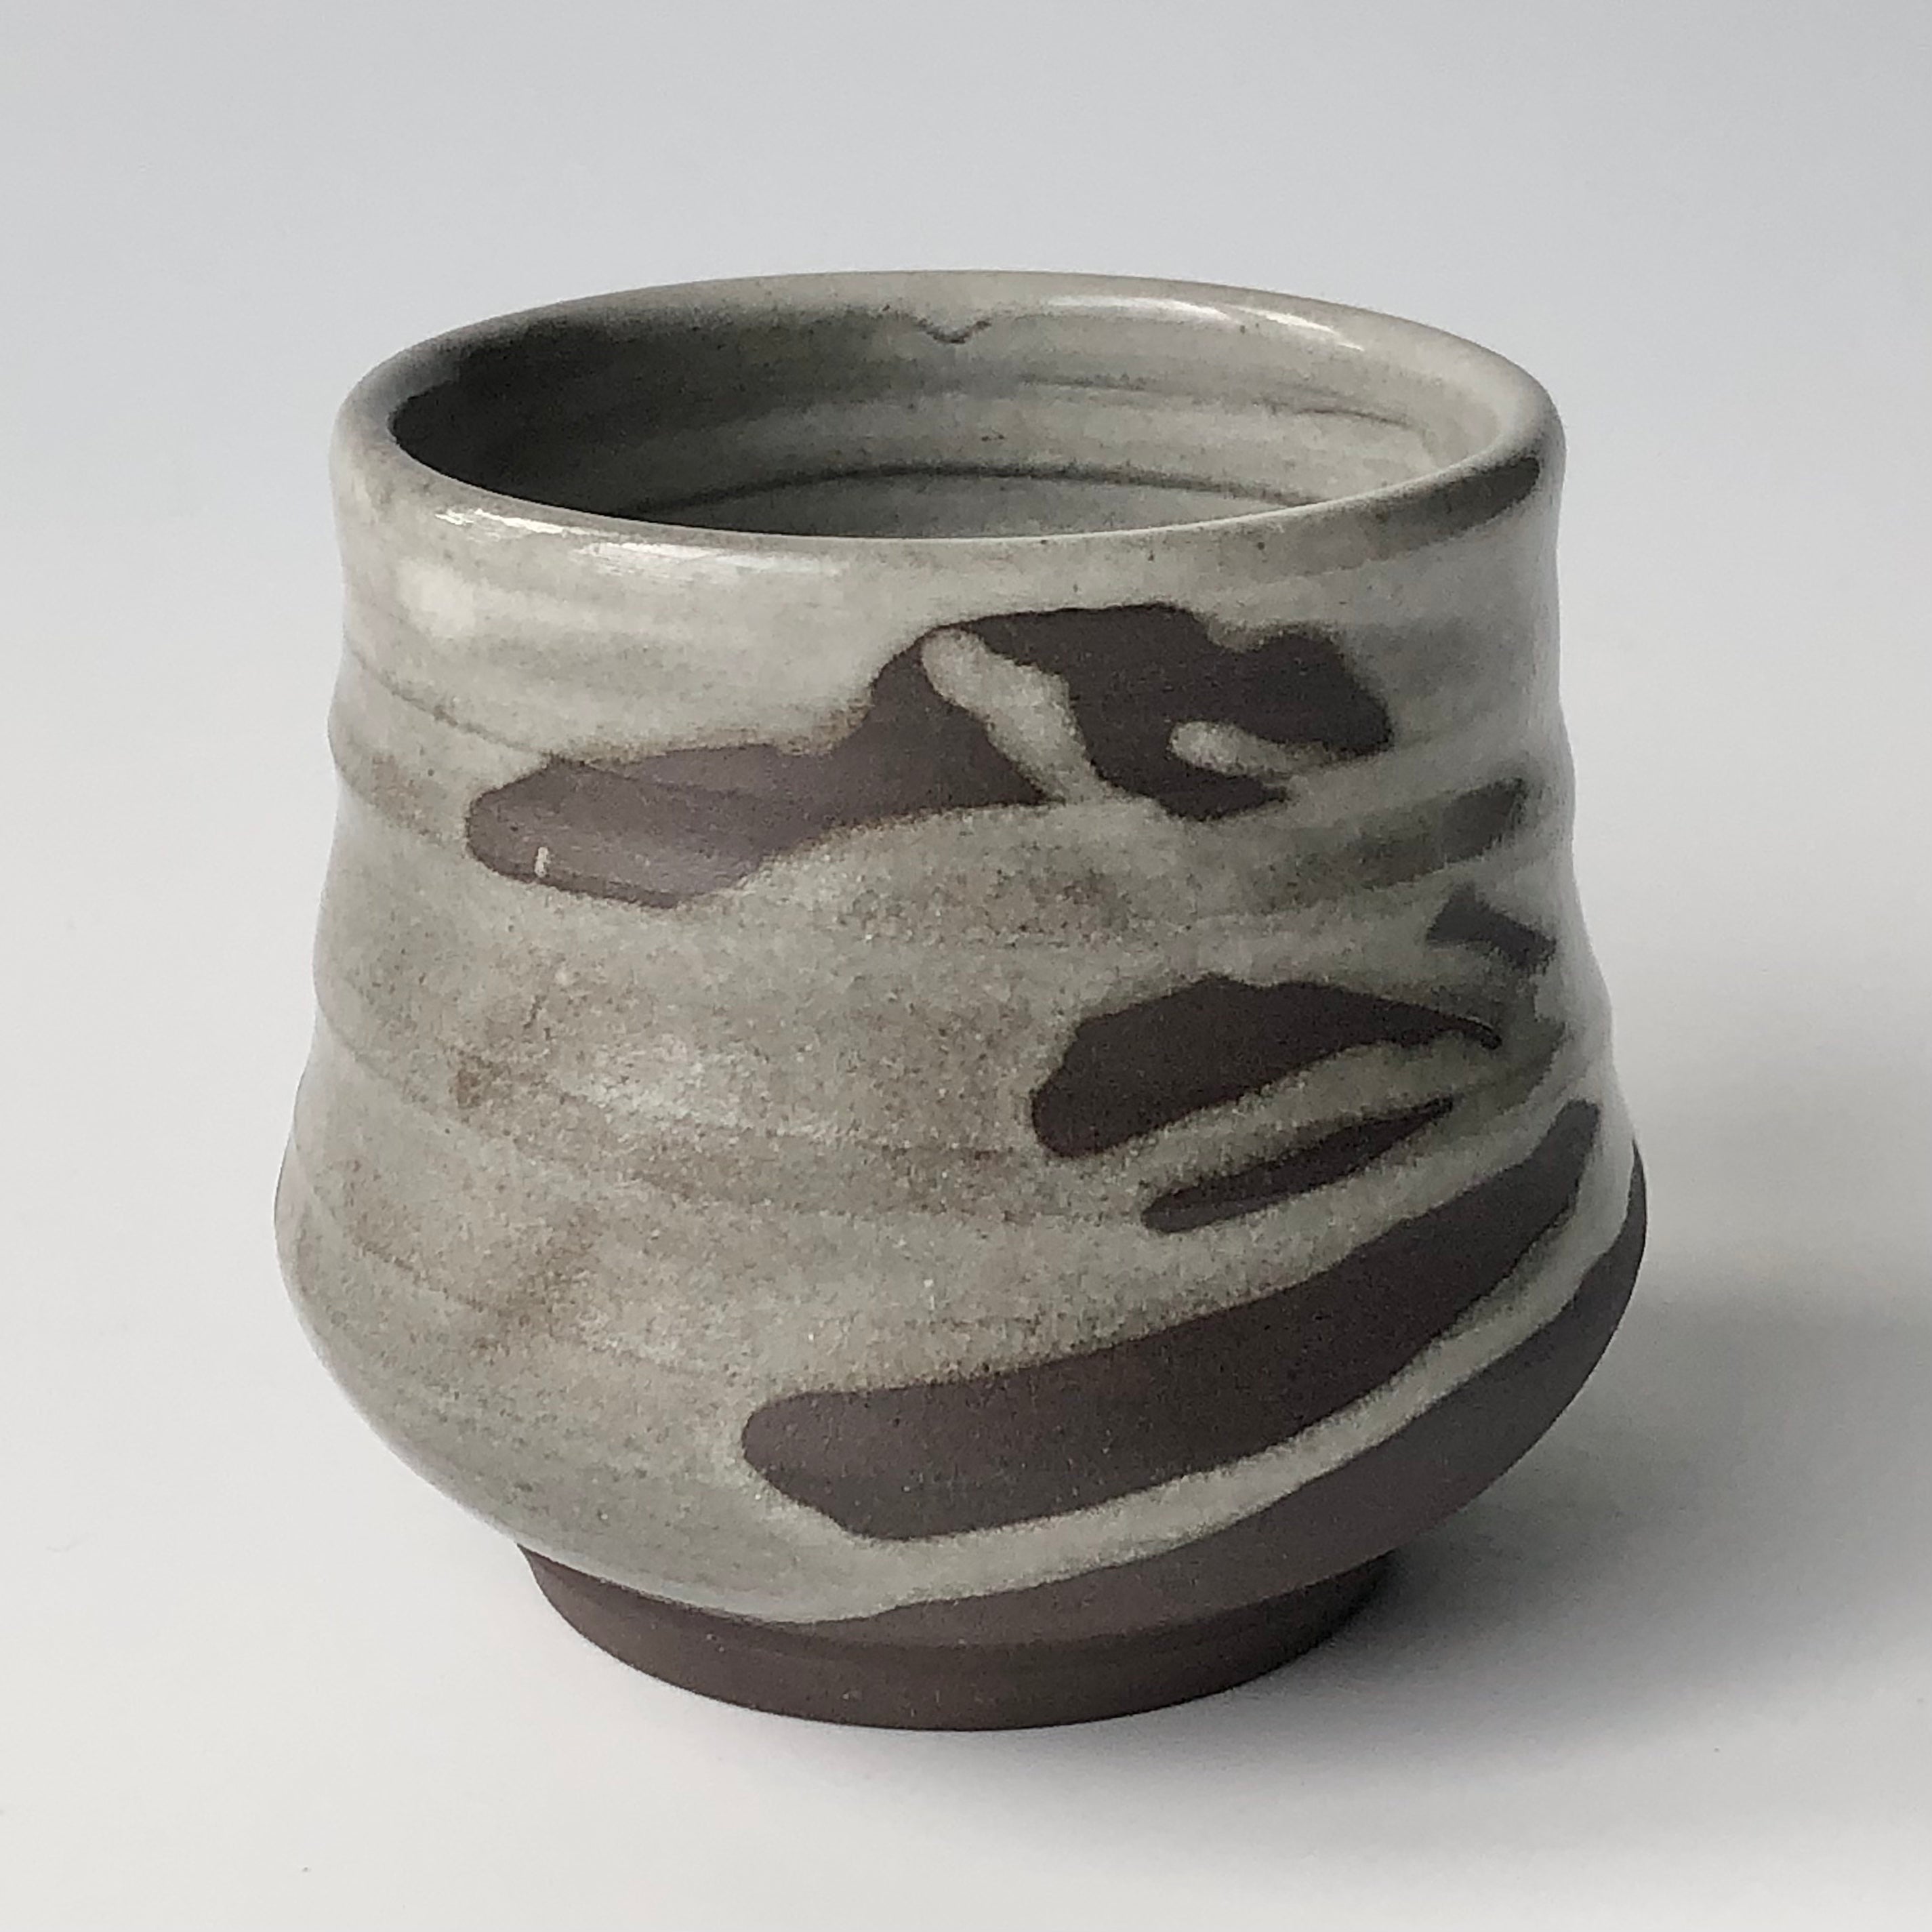 #2 Black Clay Chawan (Teabowl) Splashed with Apple Orchard Ash Glaze